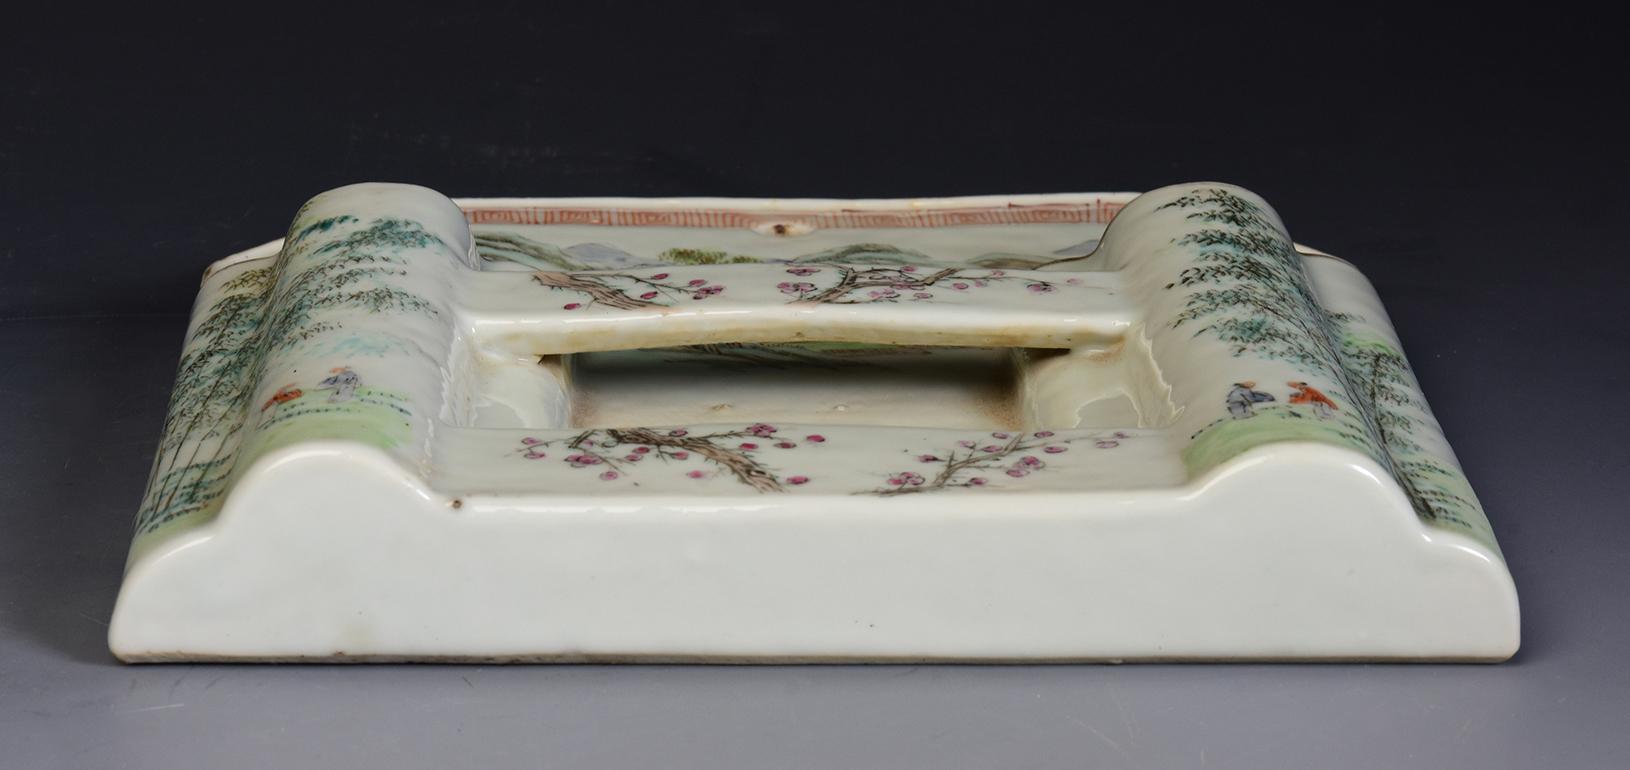 19th Century, Qing Dynasty, Rare Antique Chinese Porcelain Letter Holder For Sale 7